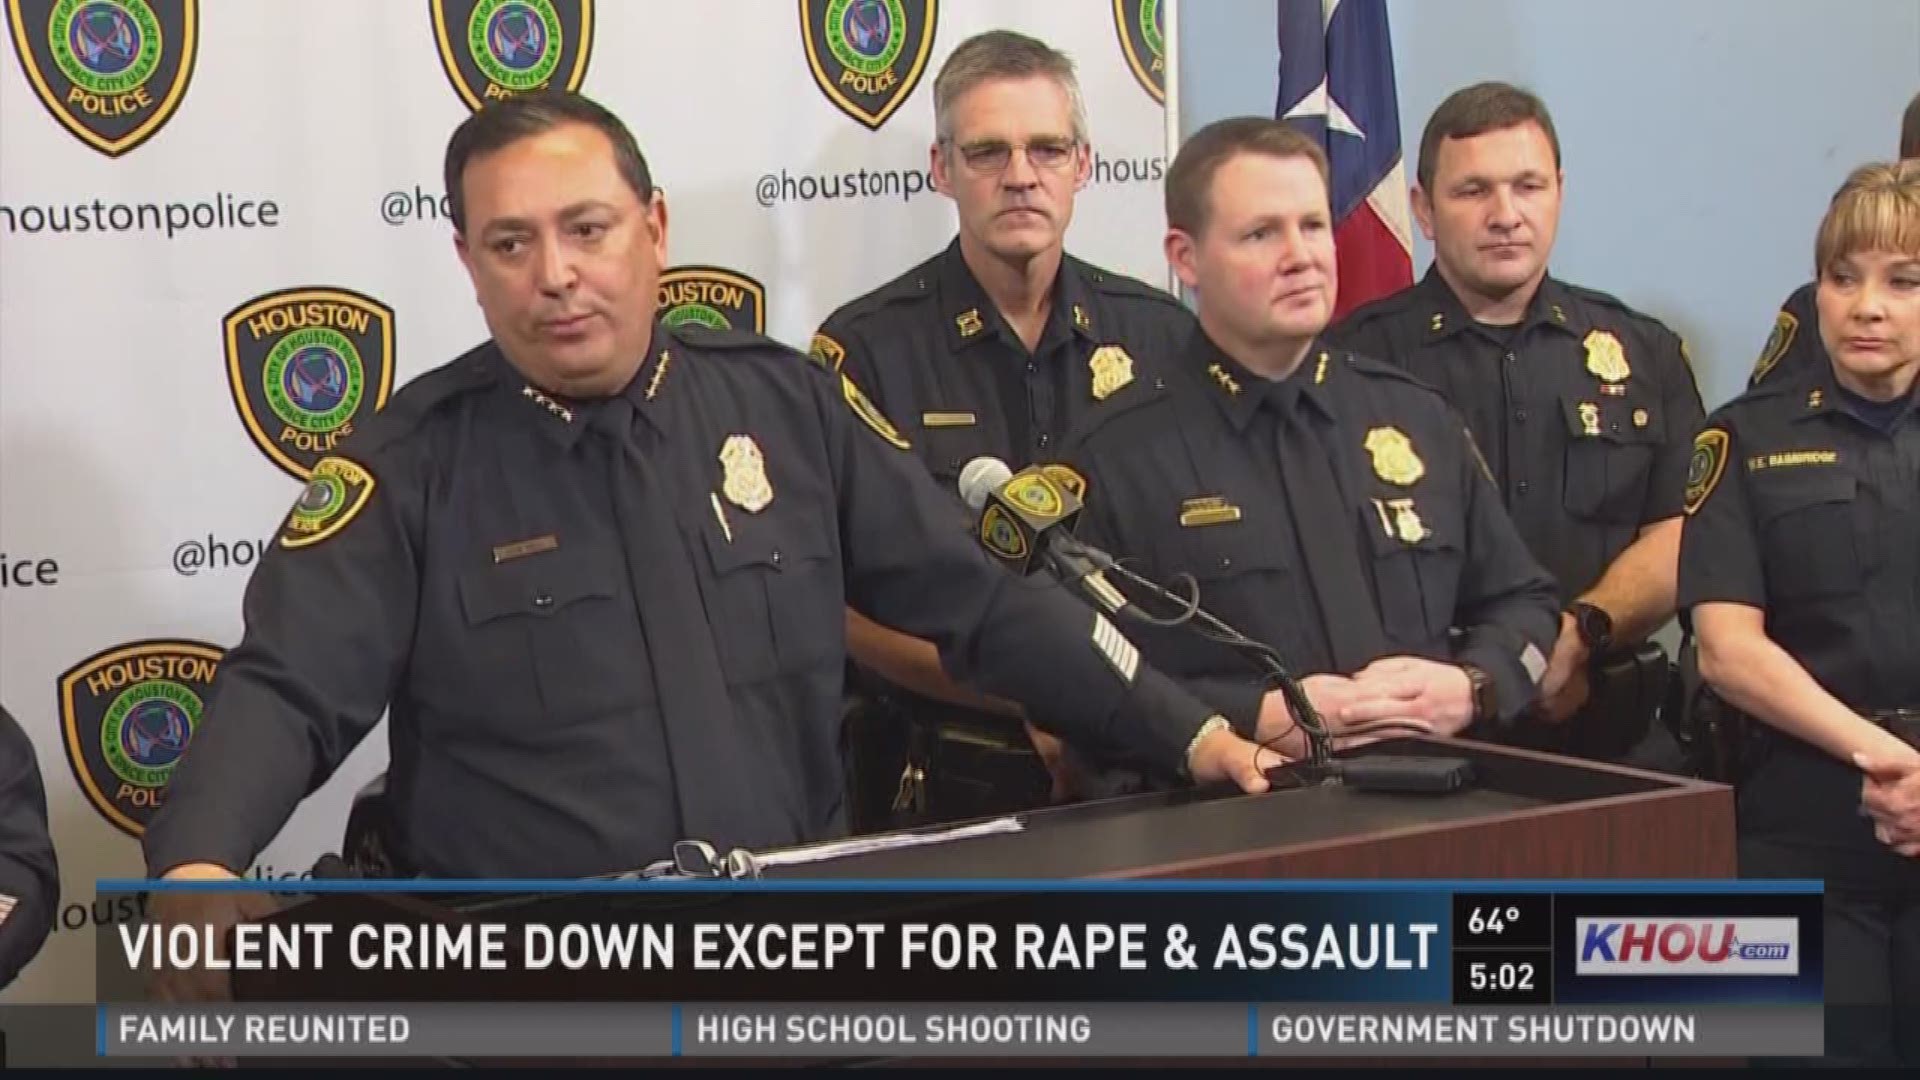 The Houston Police Department says violent crime is down in Houston except when it comes to rape and assault.